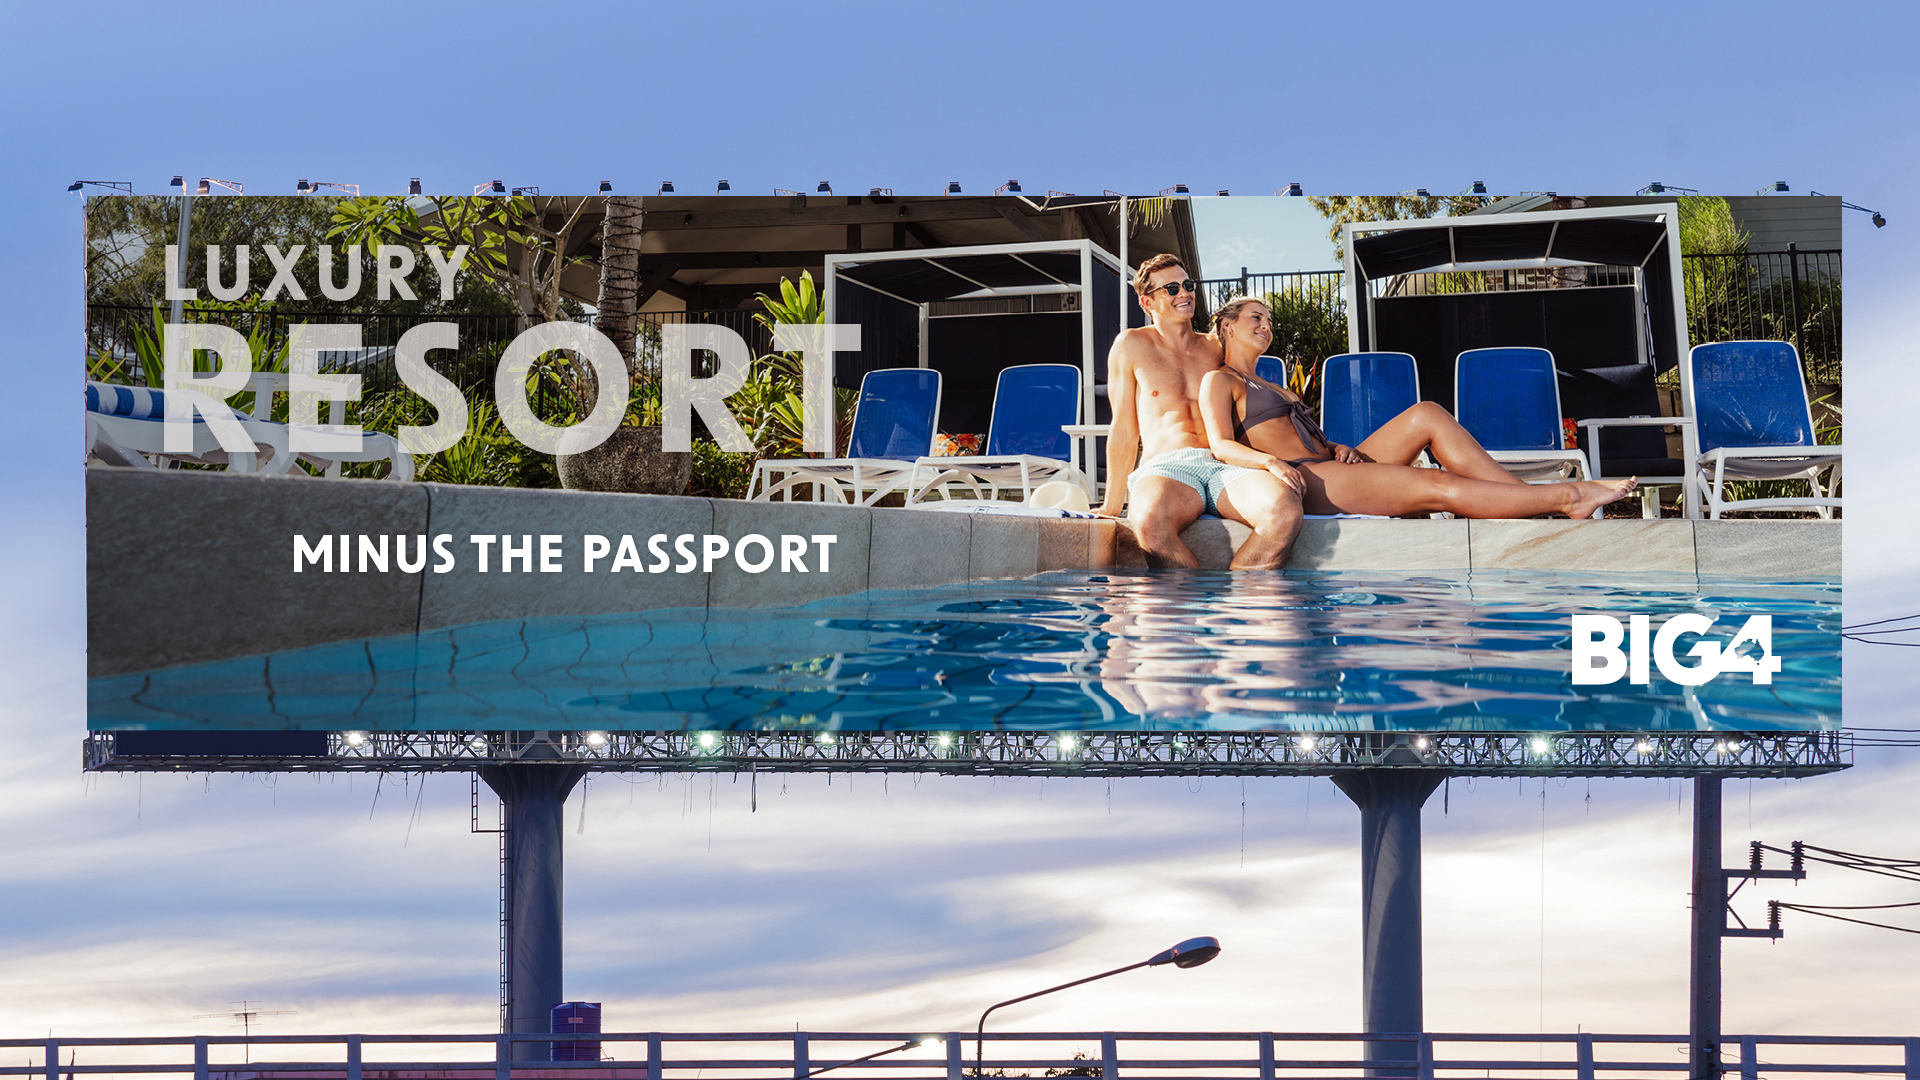 Billboard depicting young couple lounging by the pool, with the tagline 'Luxury Resort Minus the Passport'. Part of Big 4's 'Experience More' campaign by Bellwether Agency, 2022